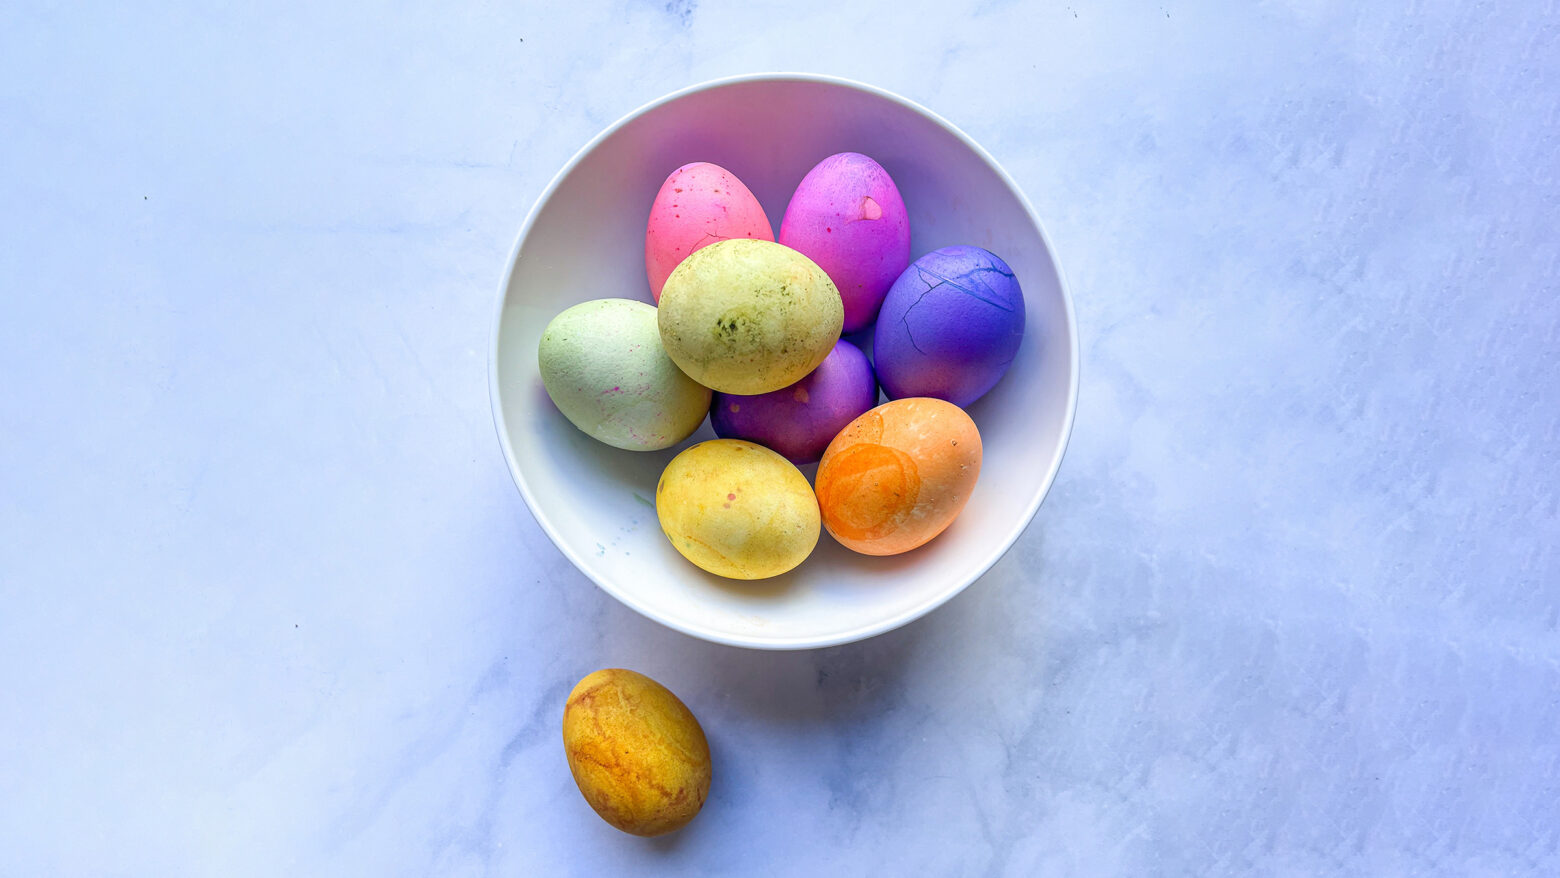 Colorful Easter eggs dyed with natural dyes sit in a white ceramic bowl on a white marble countertop.